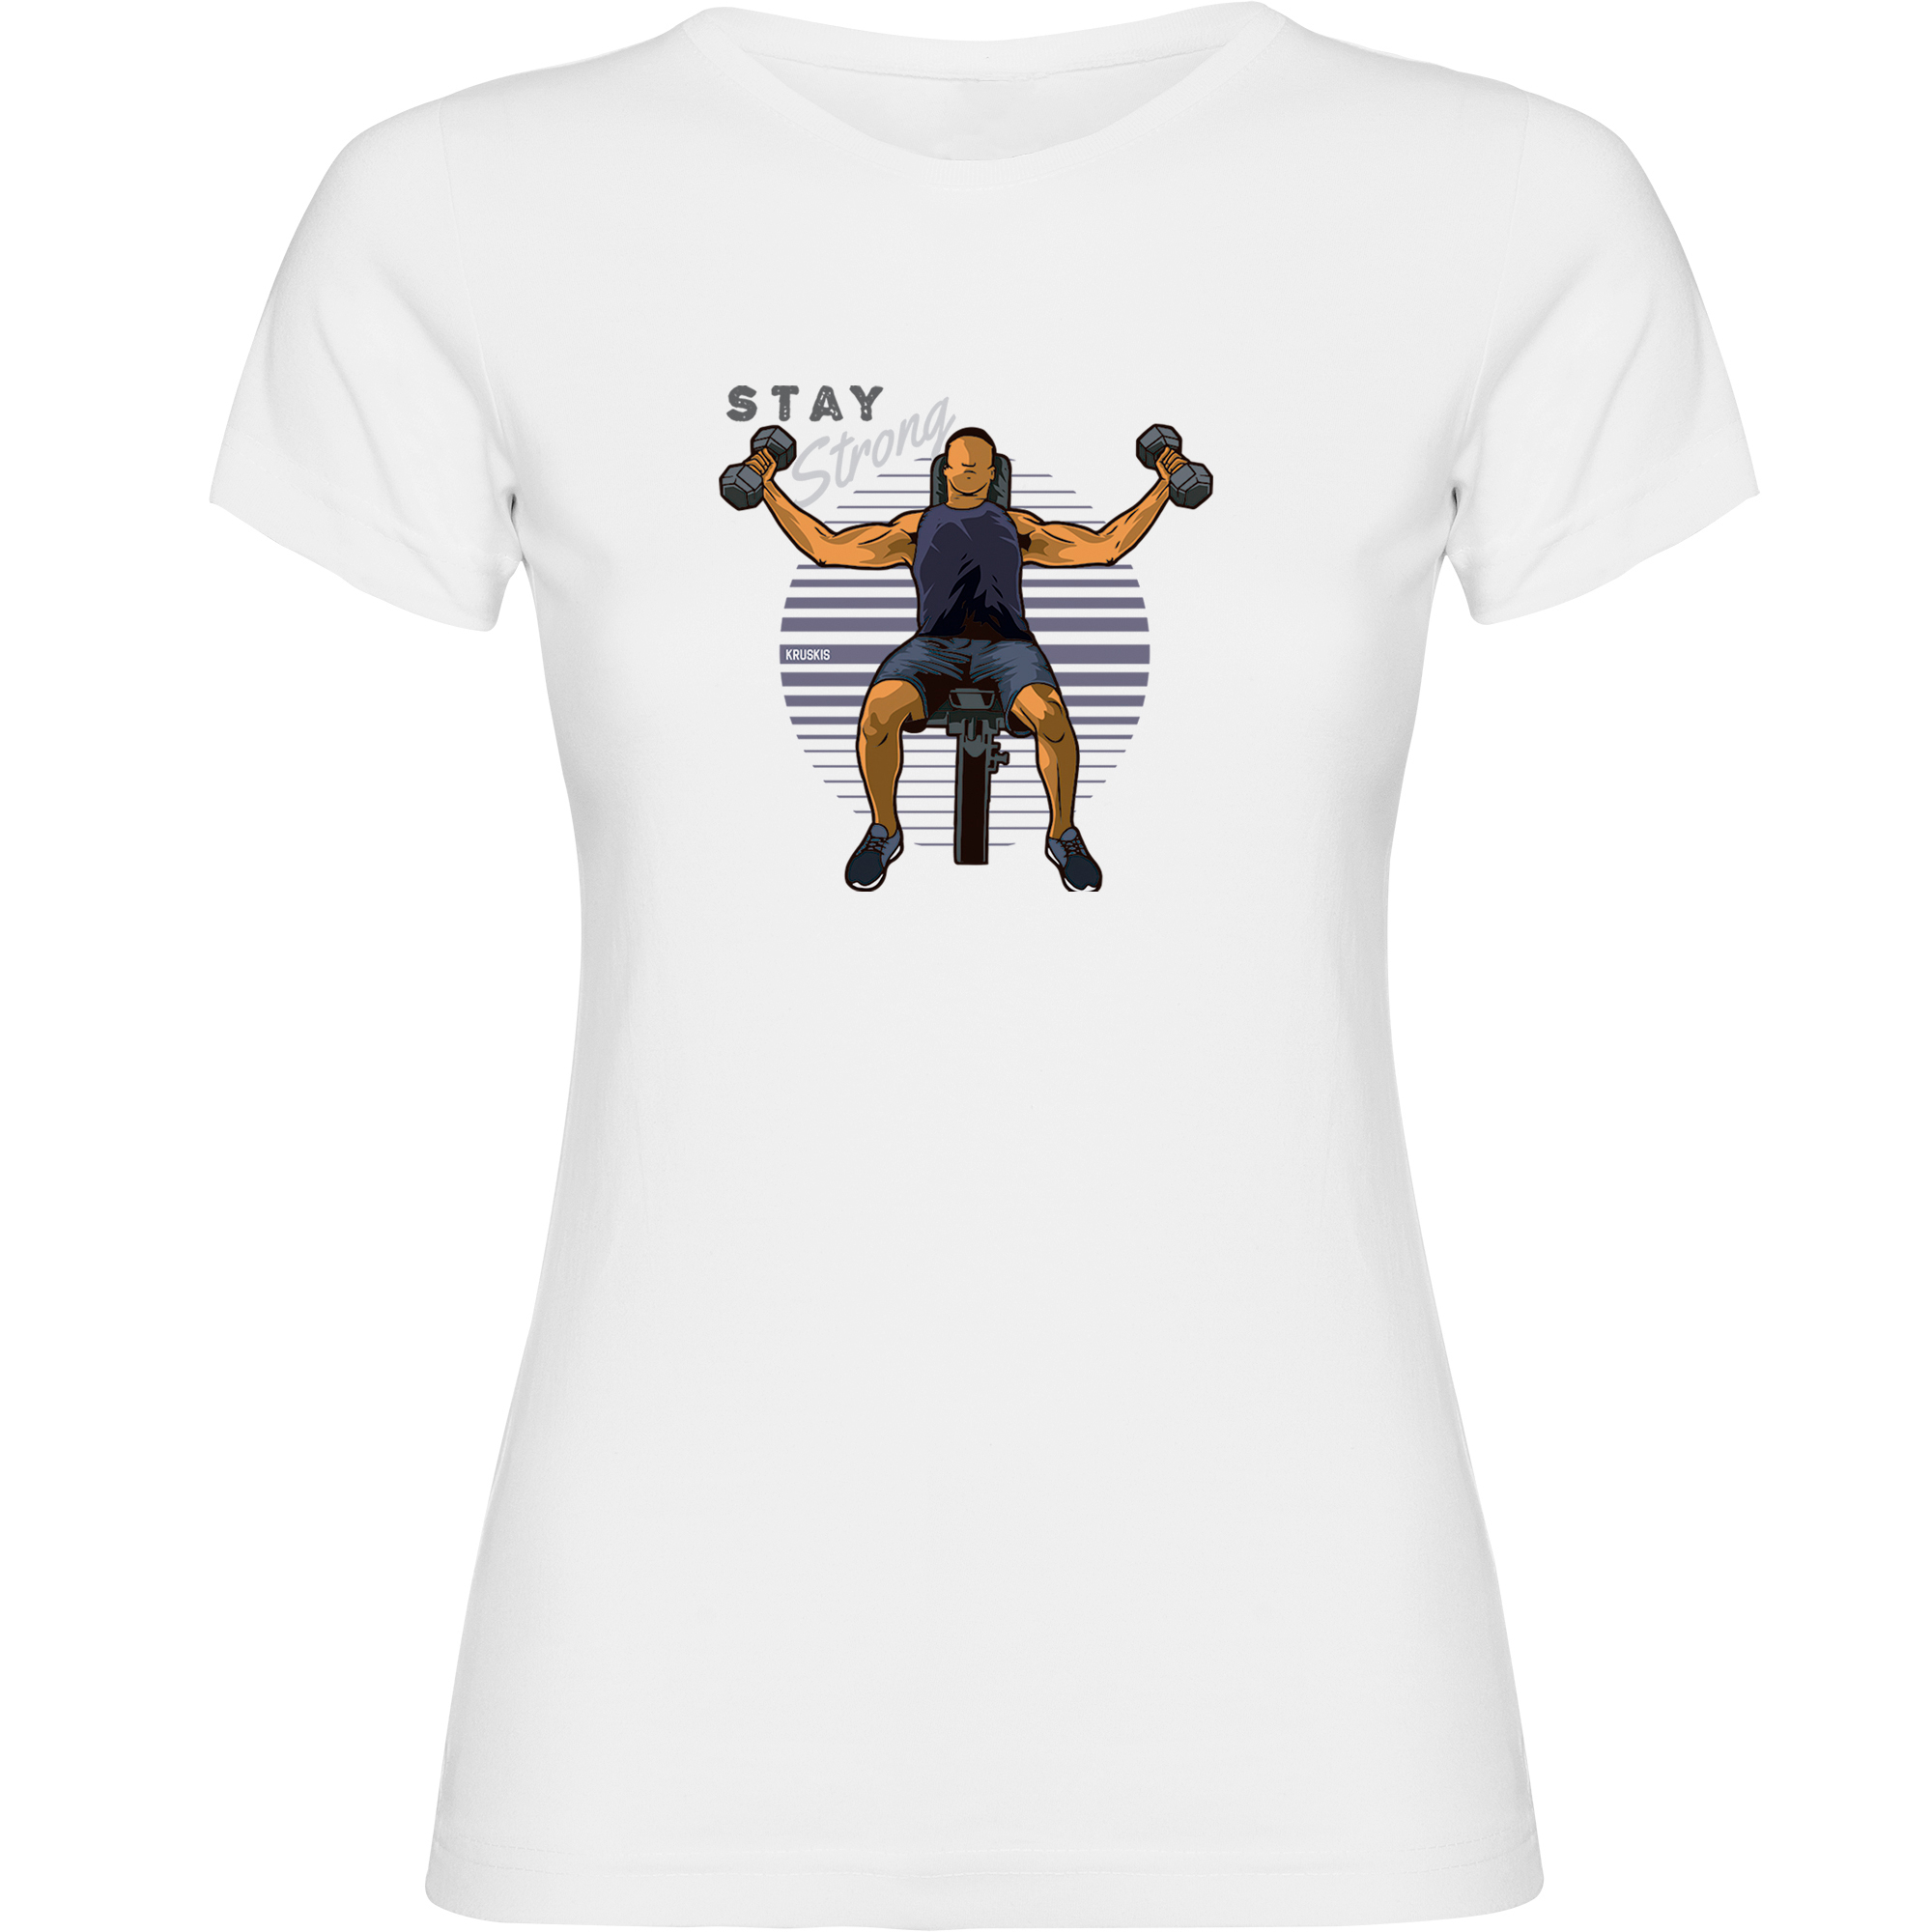 T shirt Gym Stay Strong Short Sleeves Woman